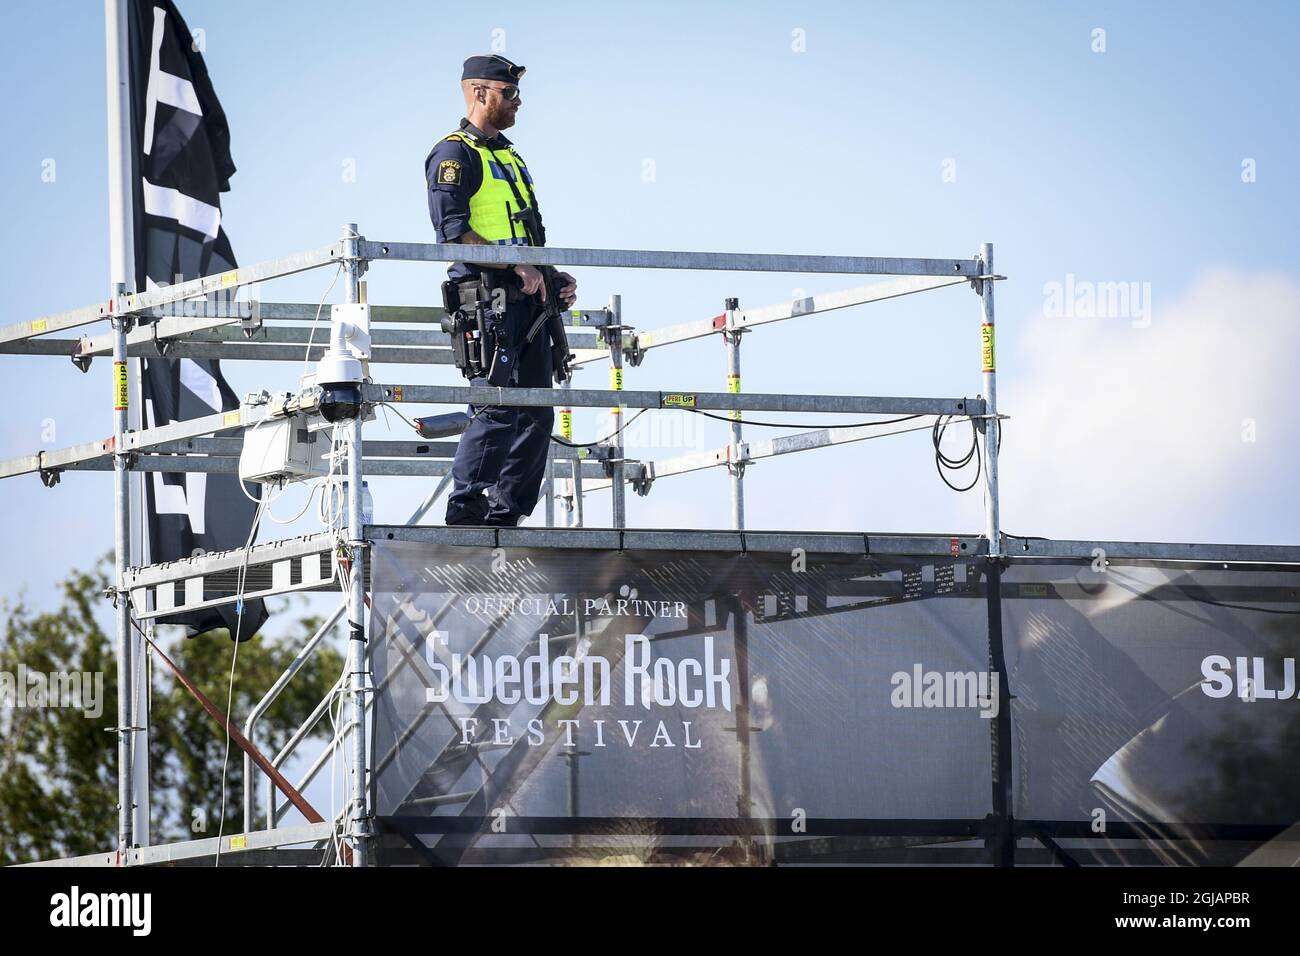 NORJE 20170607 Armed police officers at the first day of the 'Sweden Rock Festival' in Norje Sweden on Wednesday. Due to recent terror attacks the security is tighter this year Foto: Fredrik Sandberg / TT / kod 10080 swedenrock2017  Stock Photo